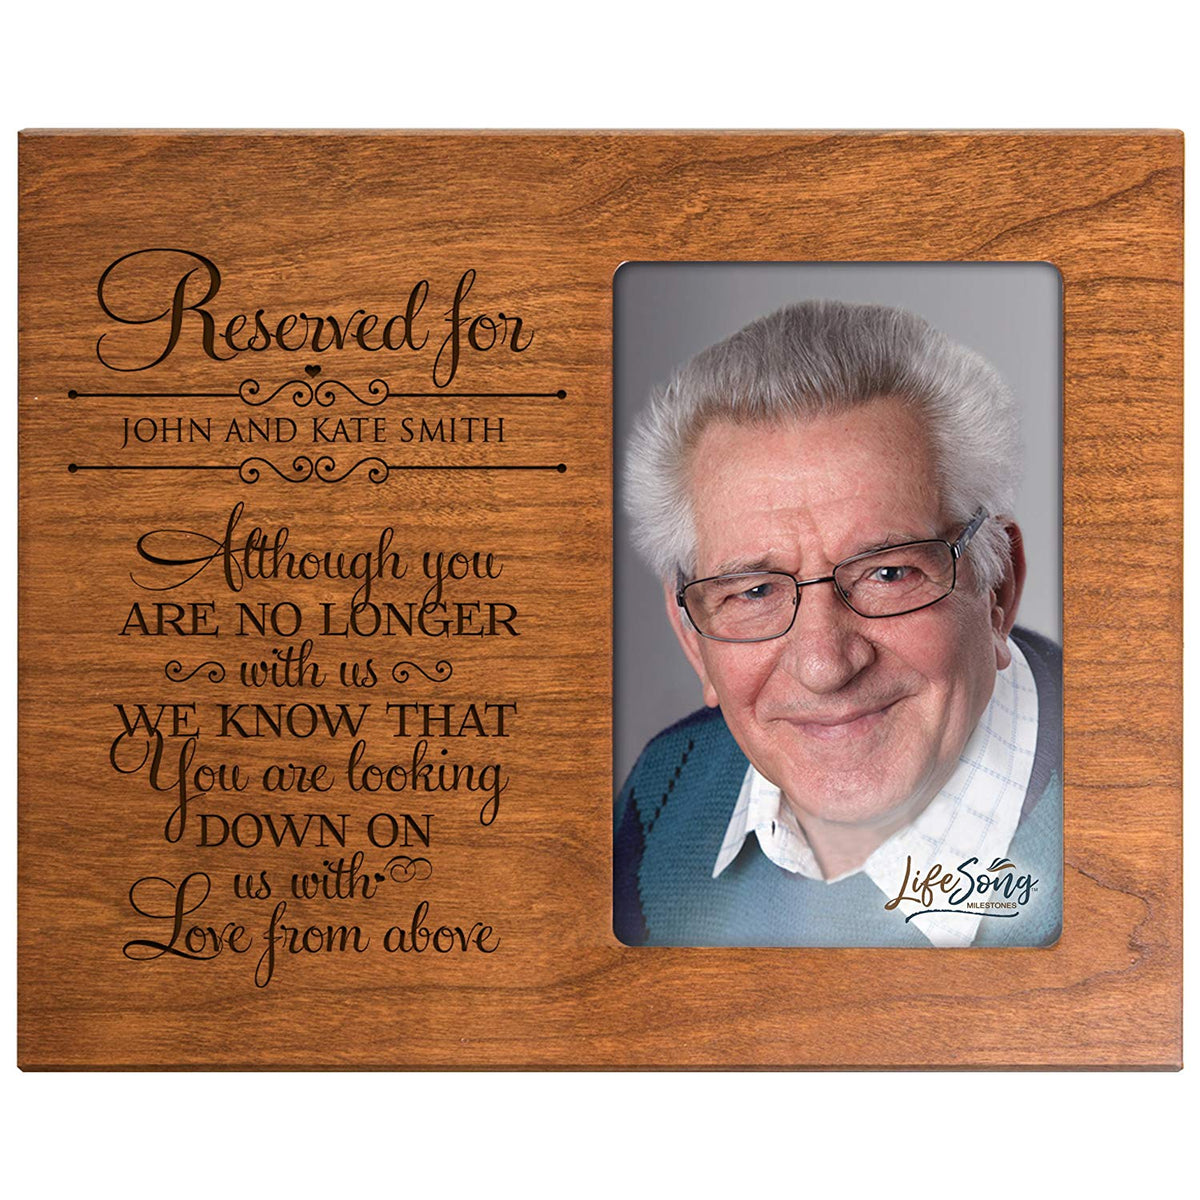 Personalized Wooden Memorial 8x10 Picture Frame holds 4x6 photo No Longer With Us - LifeSong Milestones